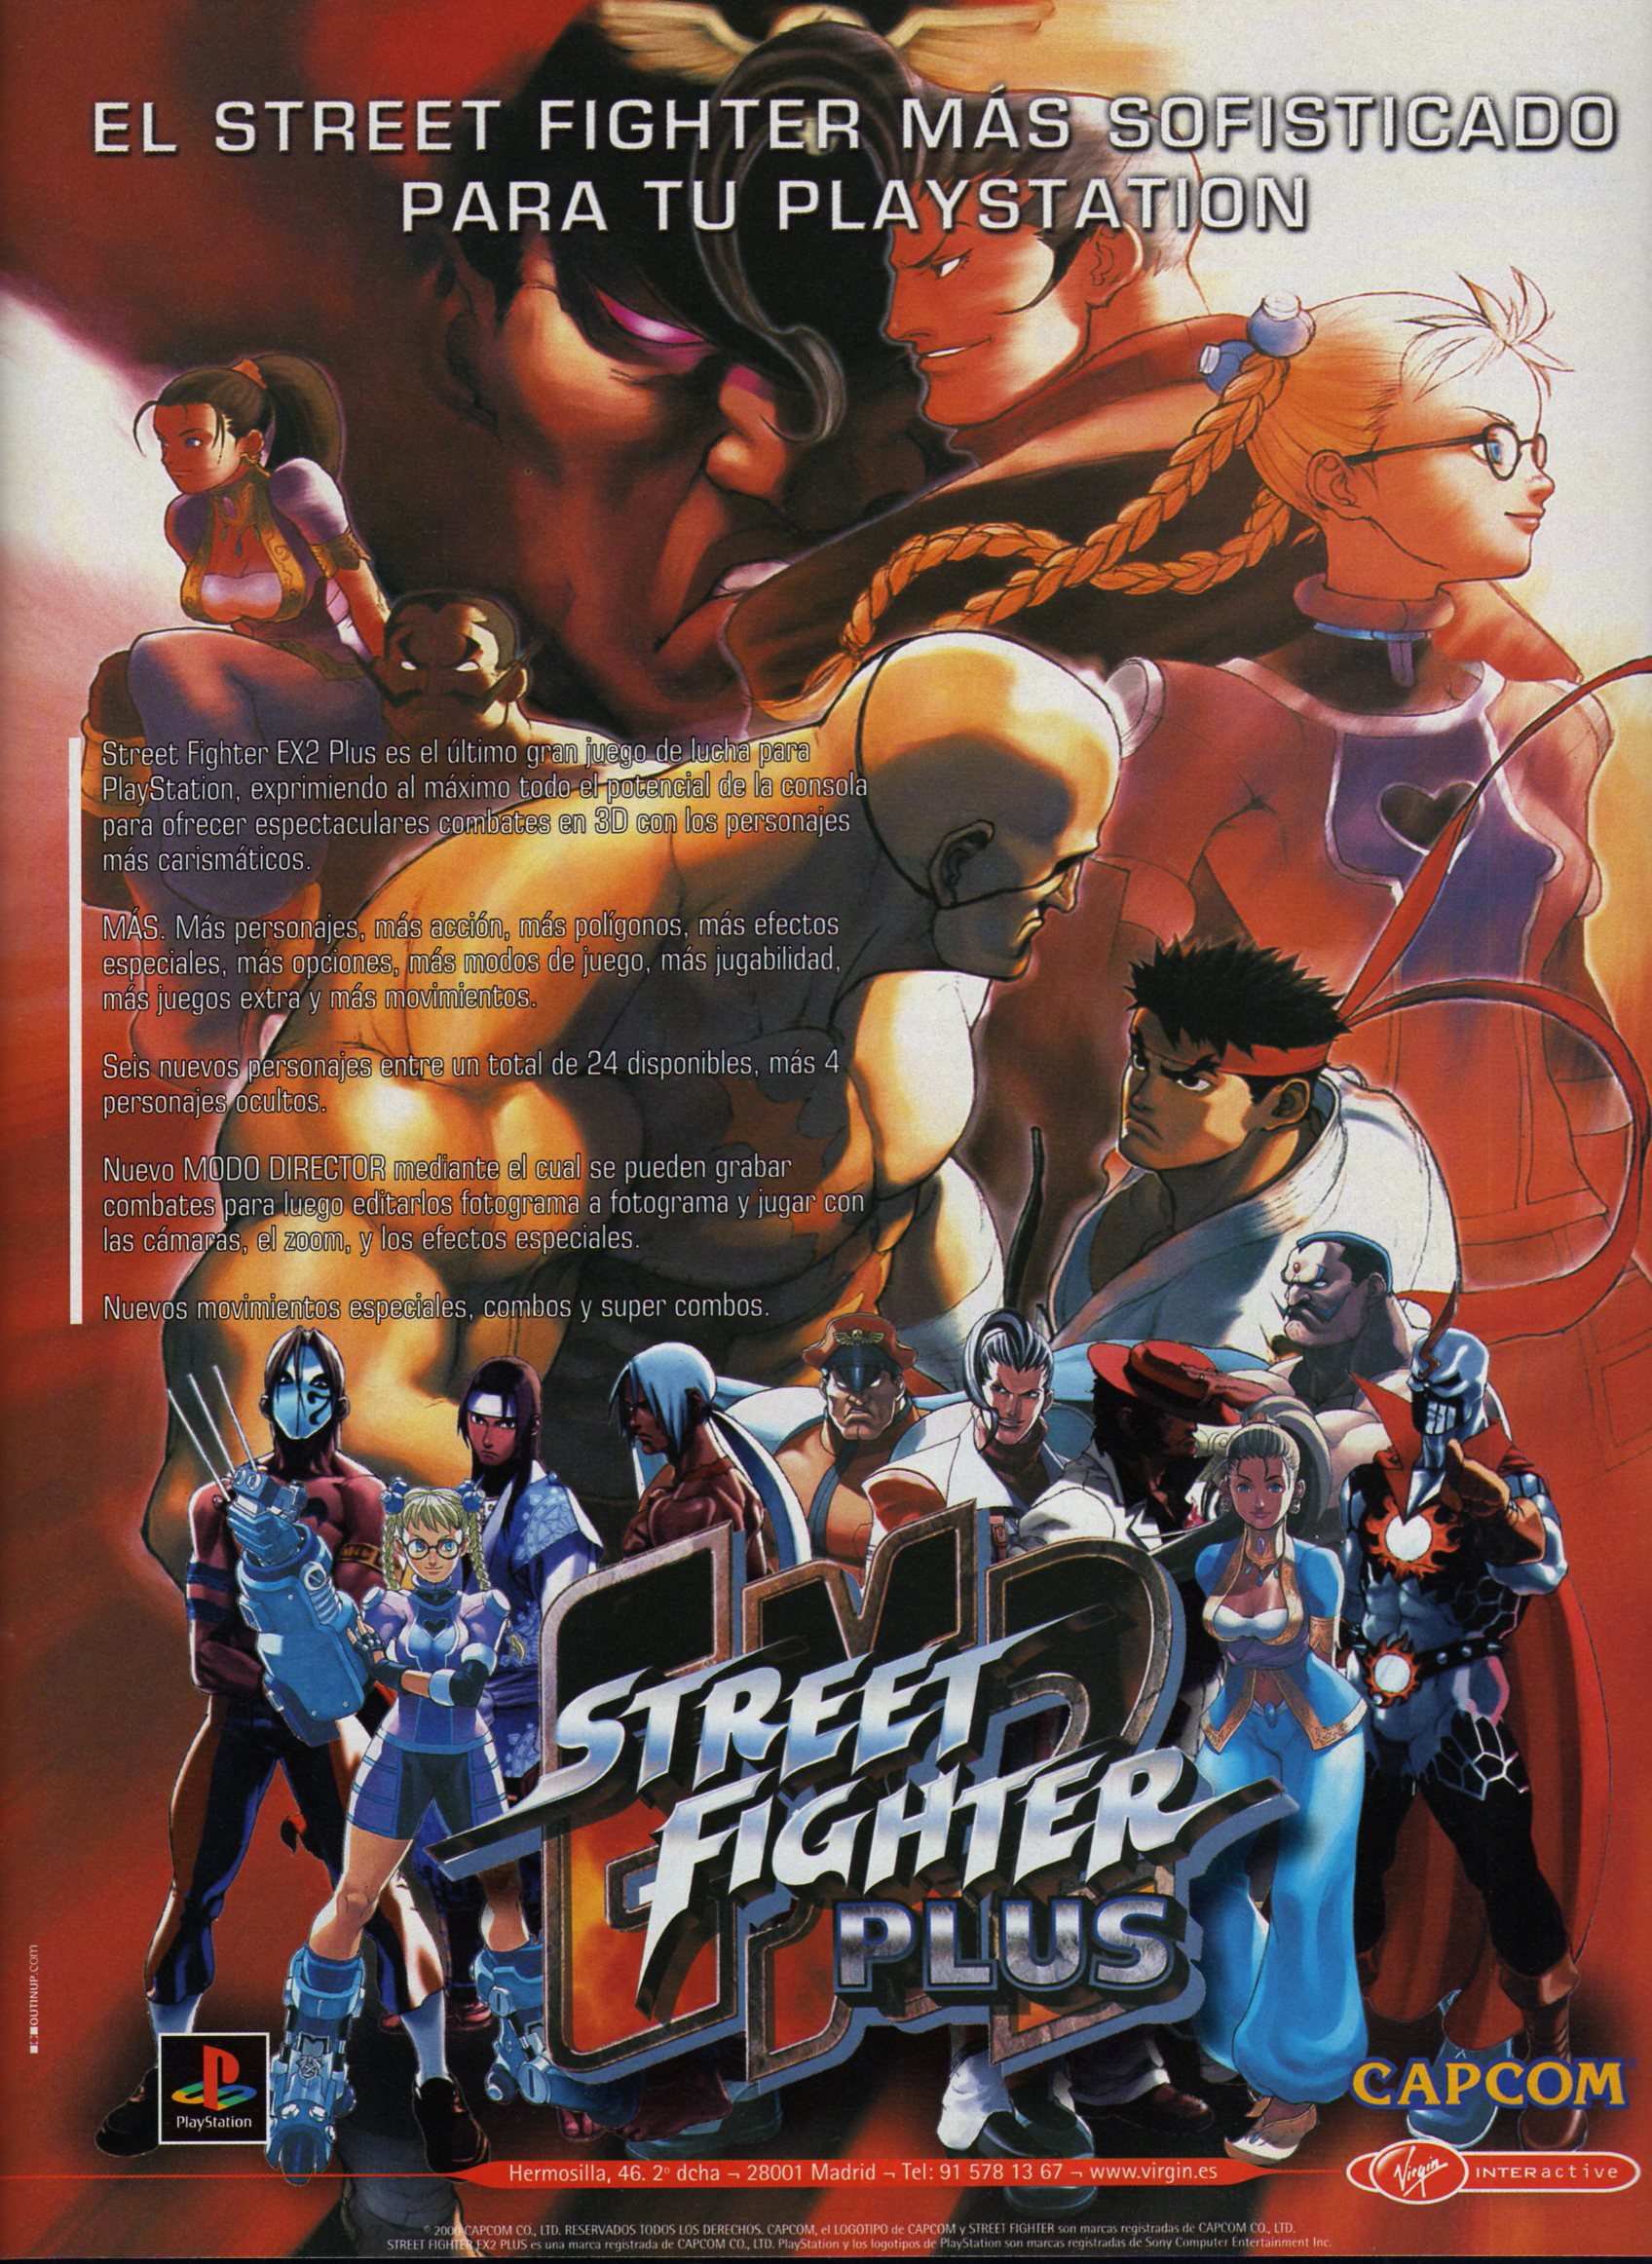 street fighter ex2 plus playstation network